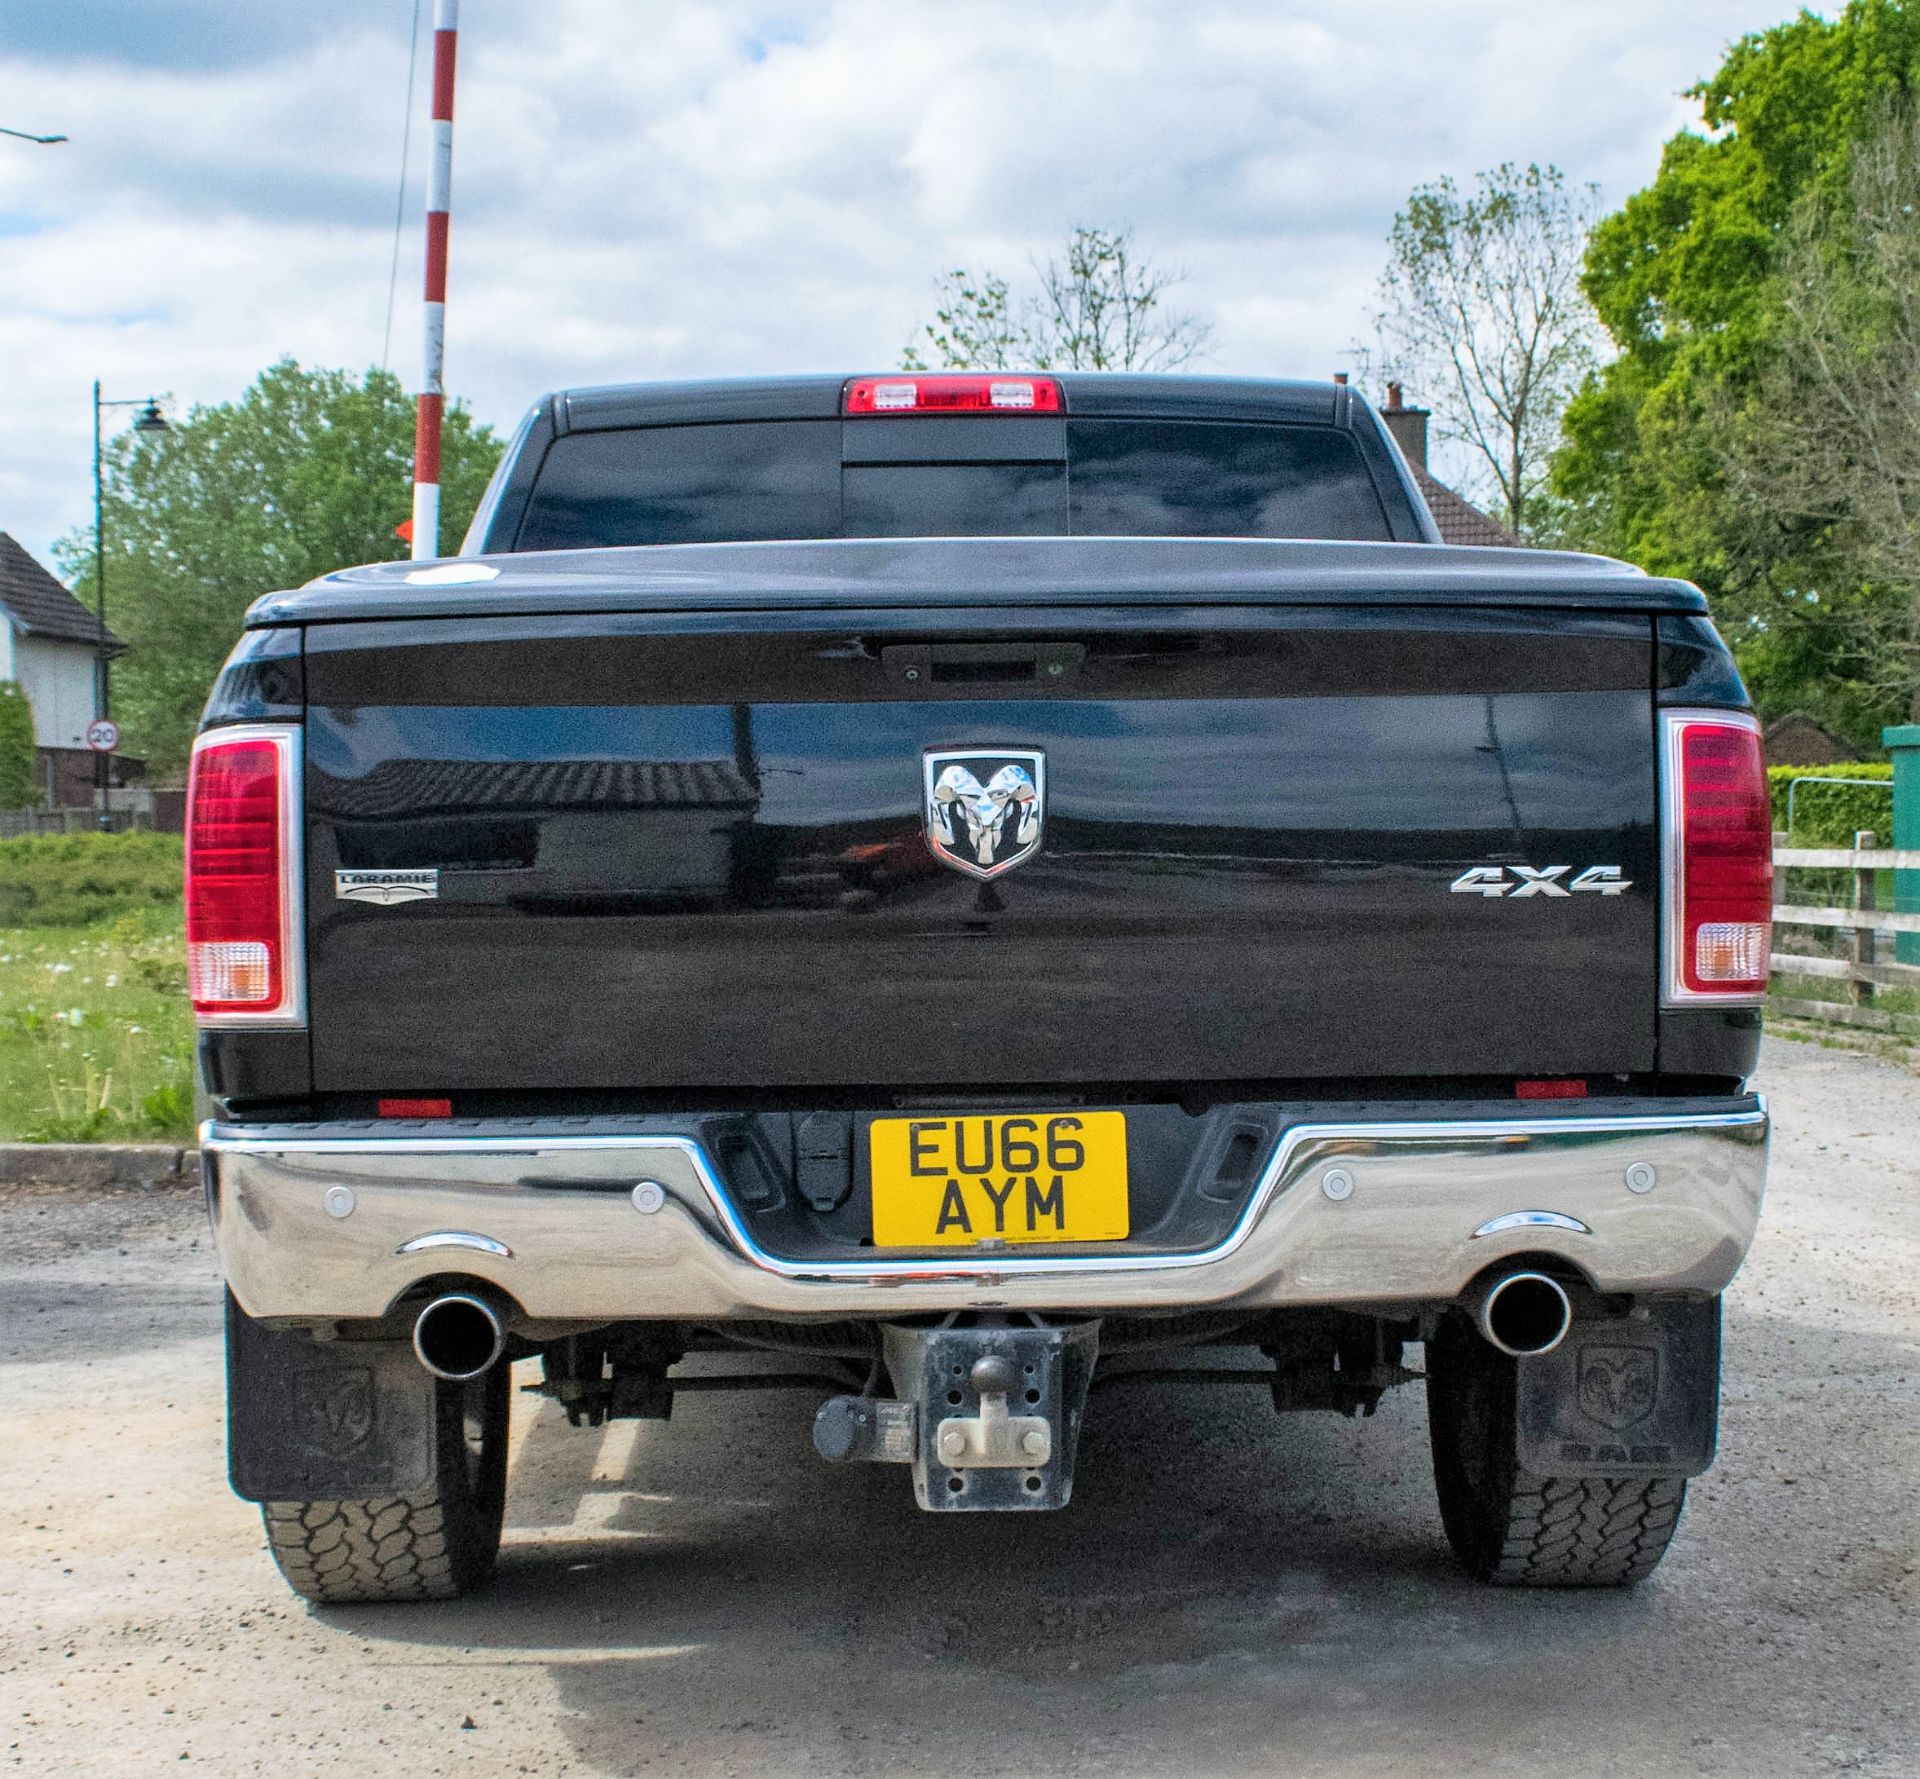 Ram Laramie 1500 3 litre Eco Diesel automatic double cab pick up Registration Number: EU66 AYM - Image 6 of 28